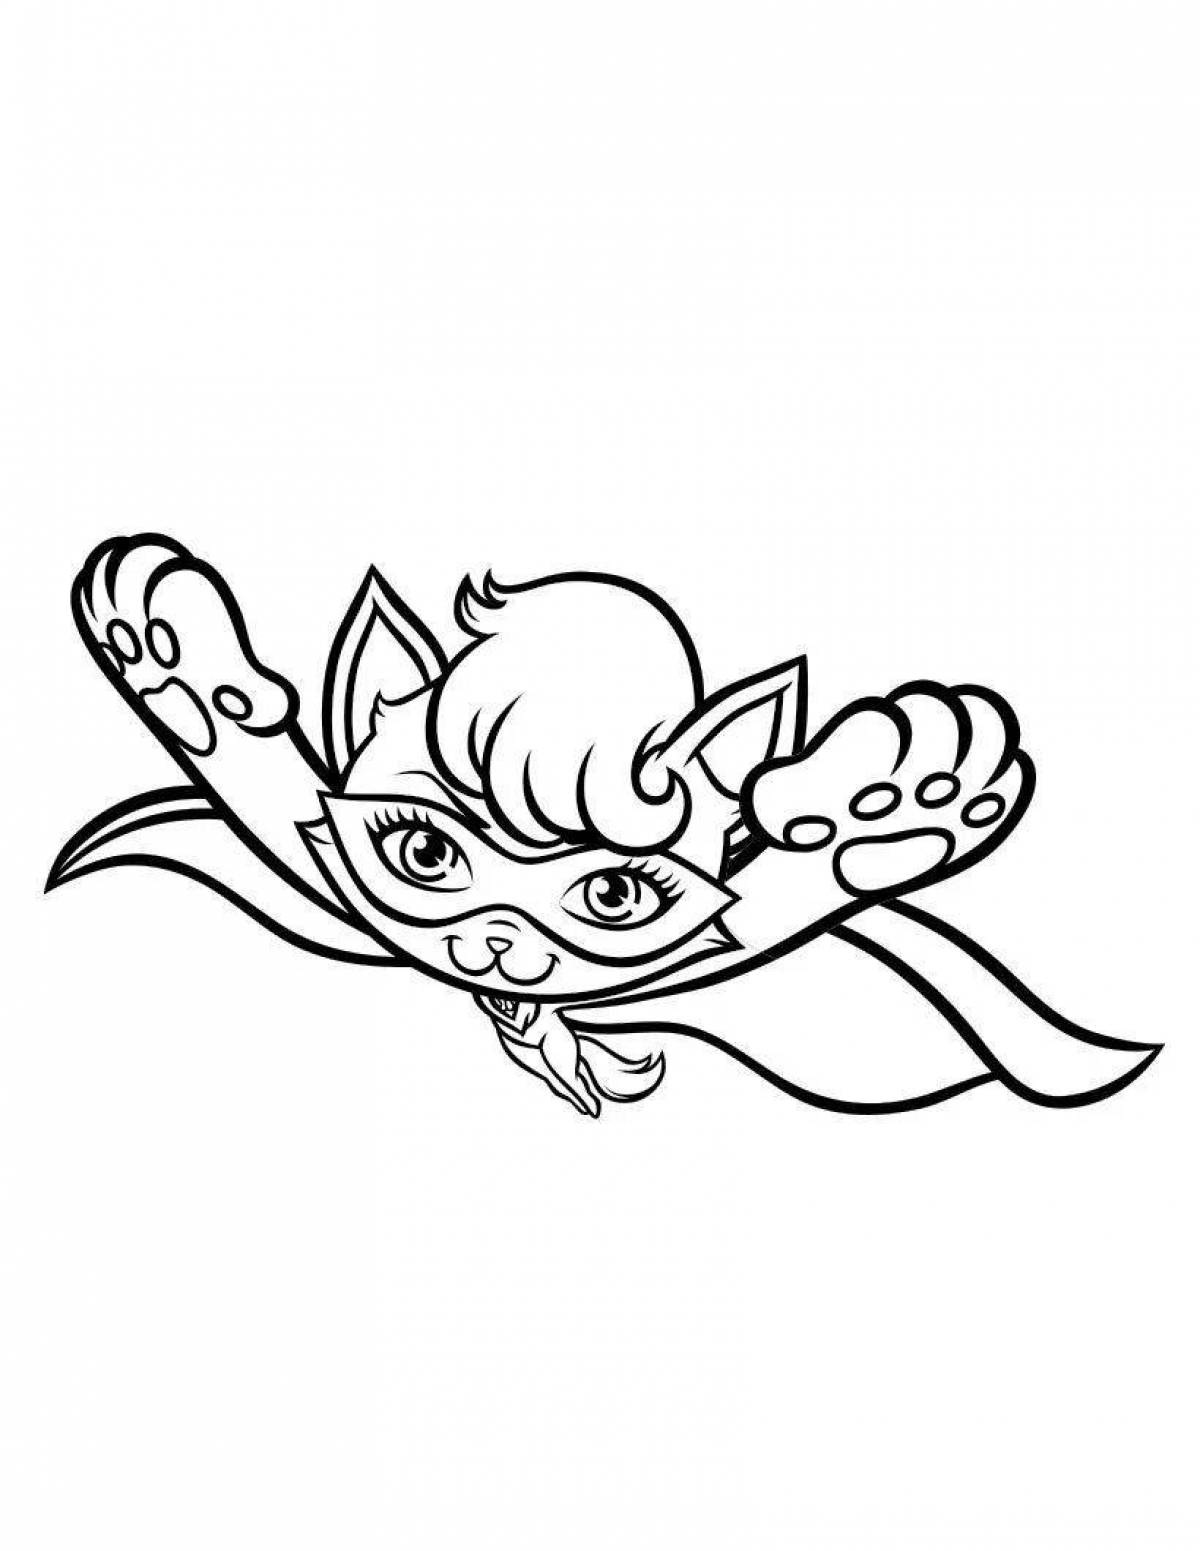 Coloring book sly super cat